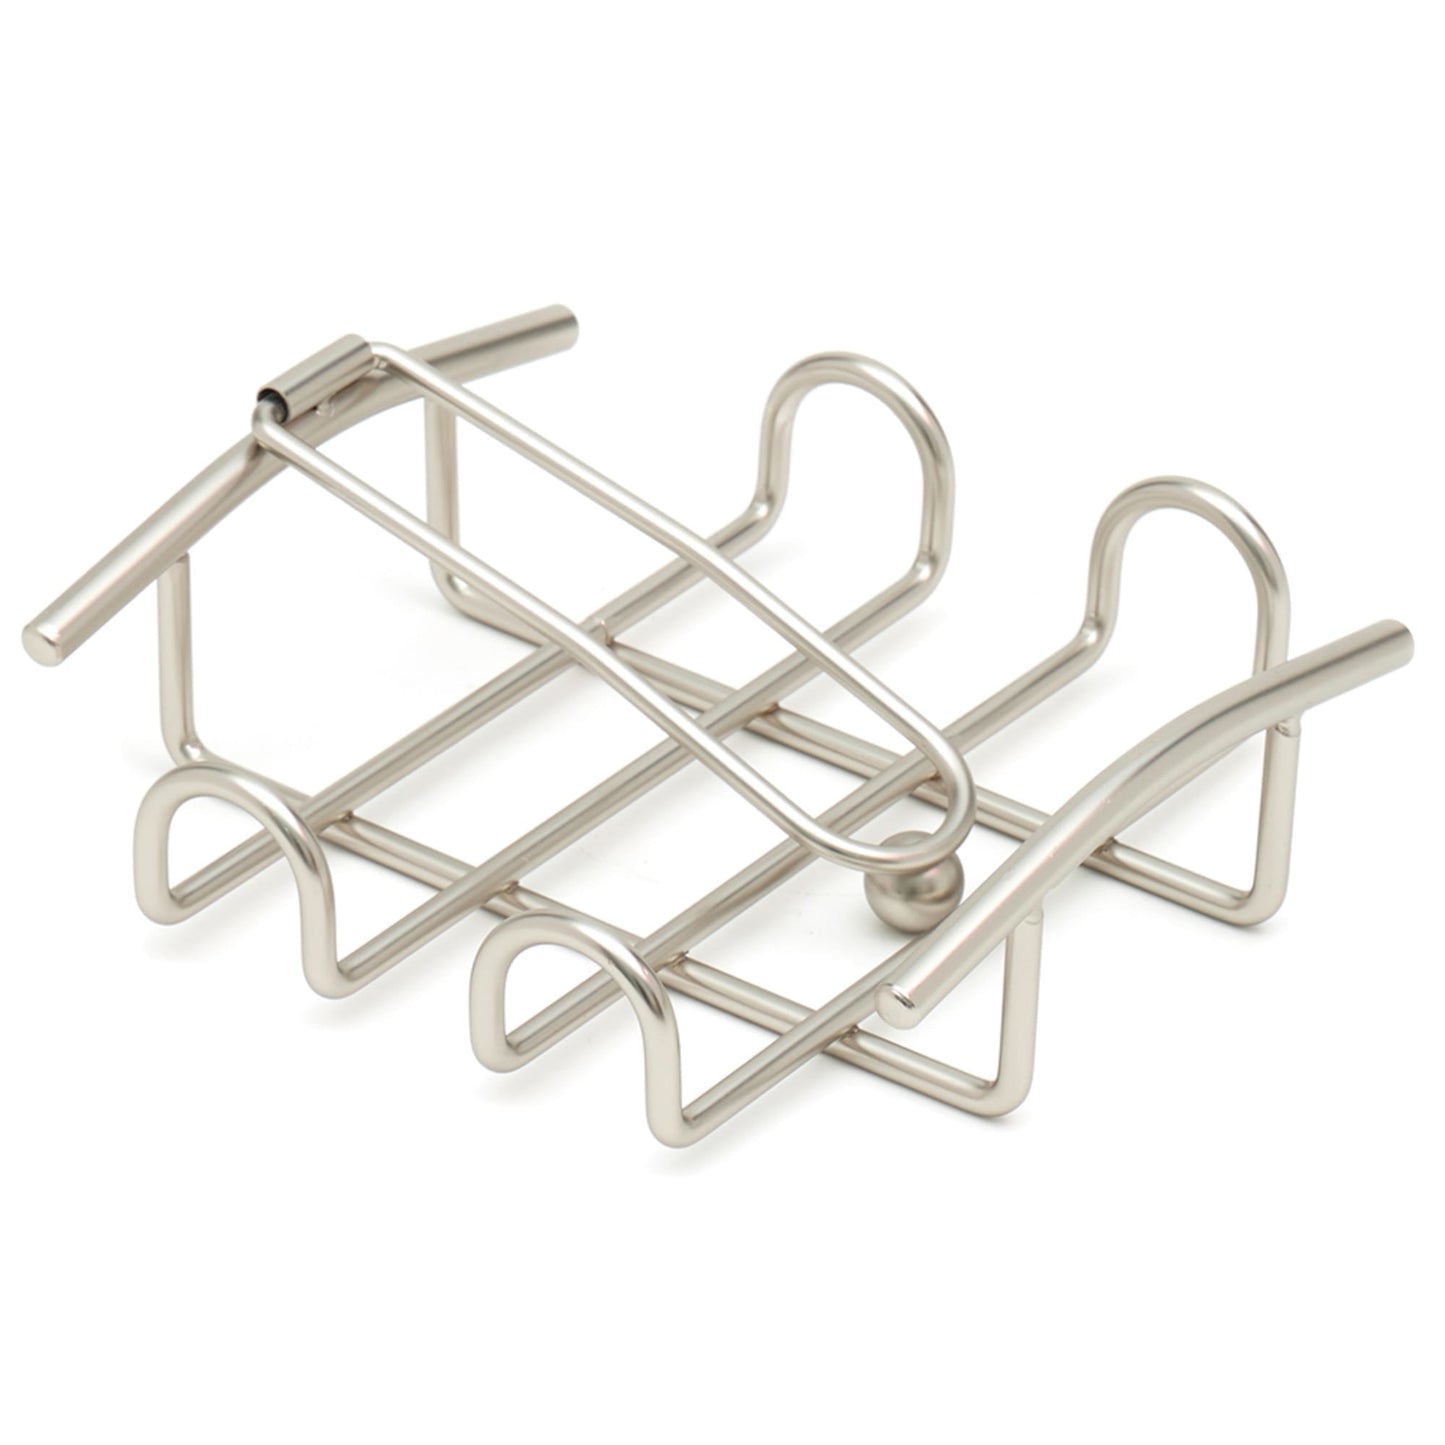 Michael Graves Design Simplicity Flat Steel Napkin Holder with Weighted Pivoting Arm, Satin Nickel